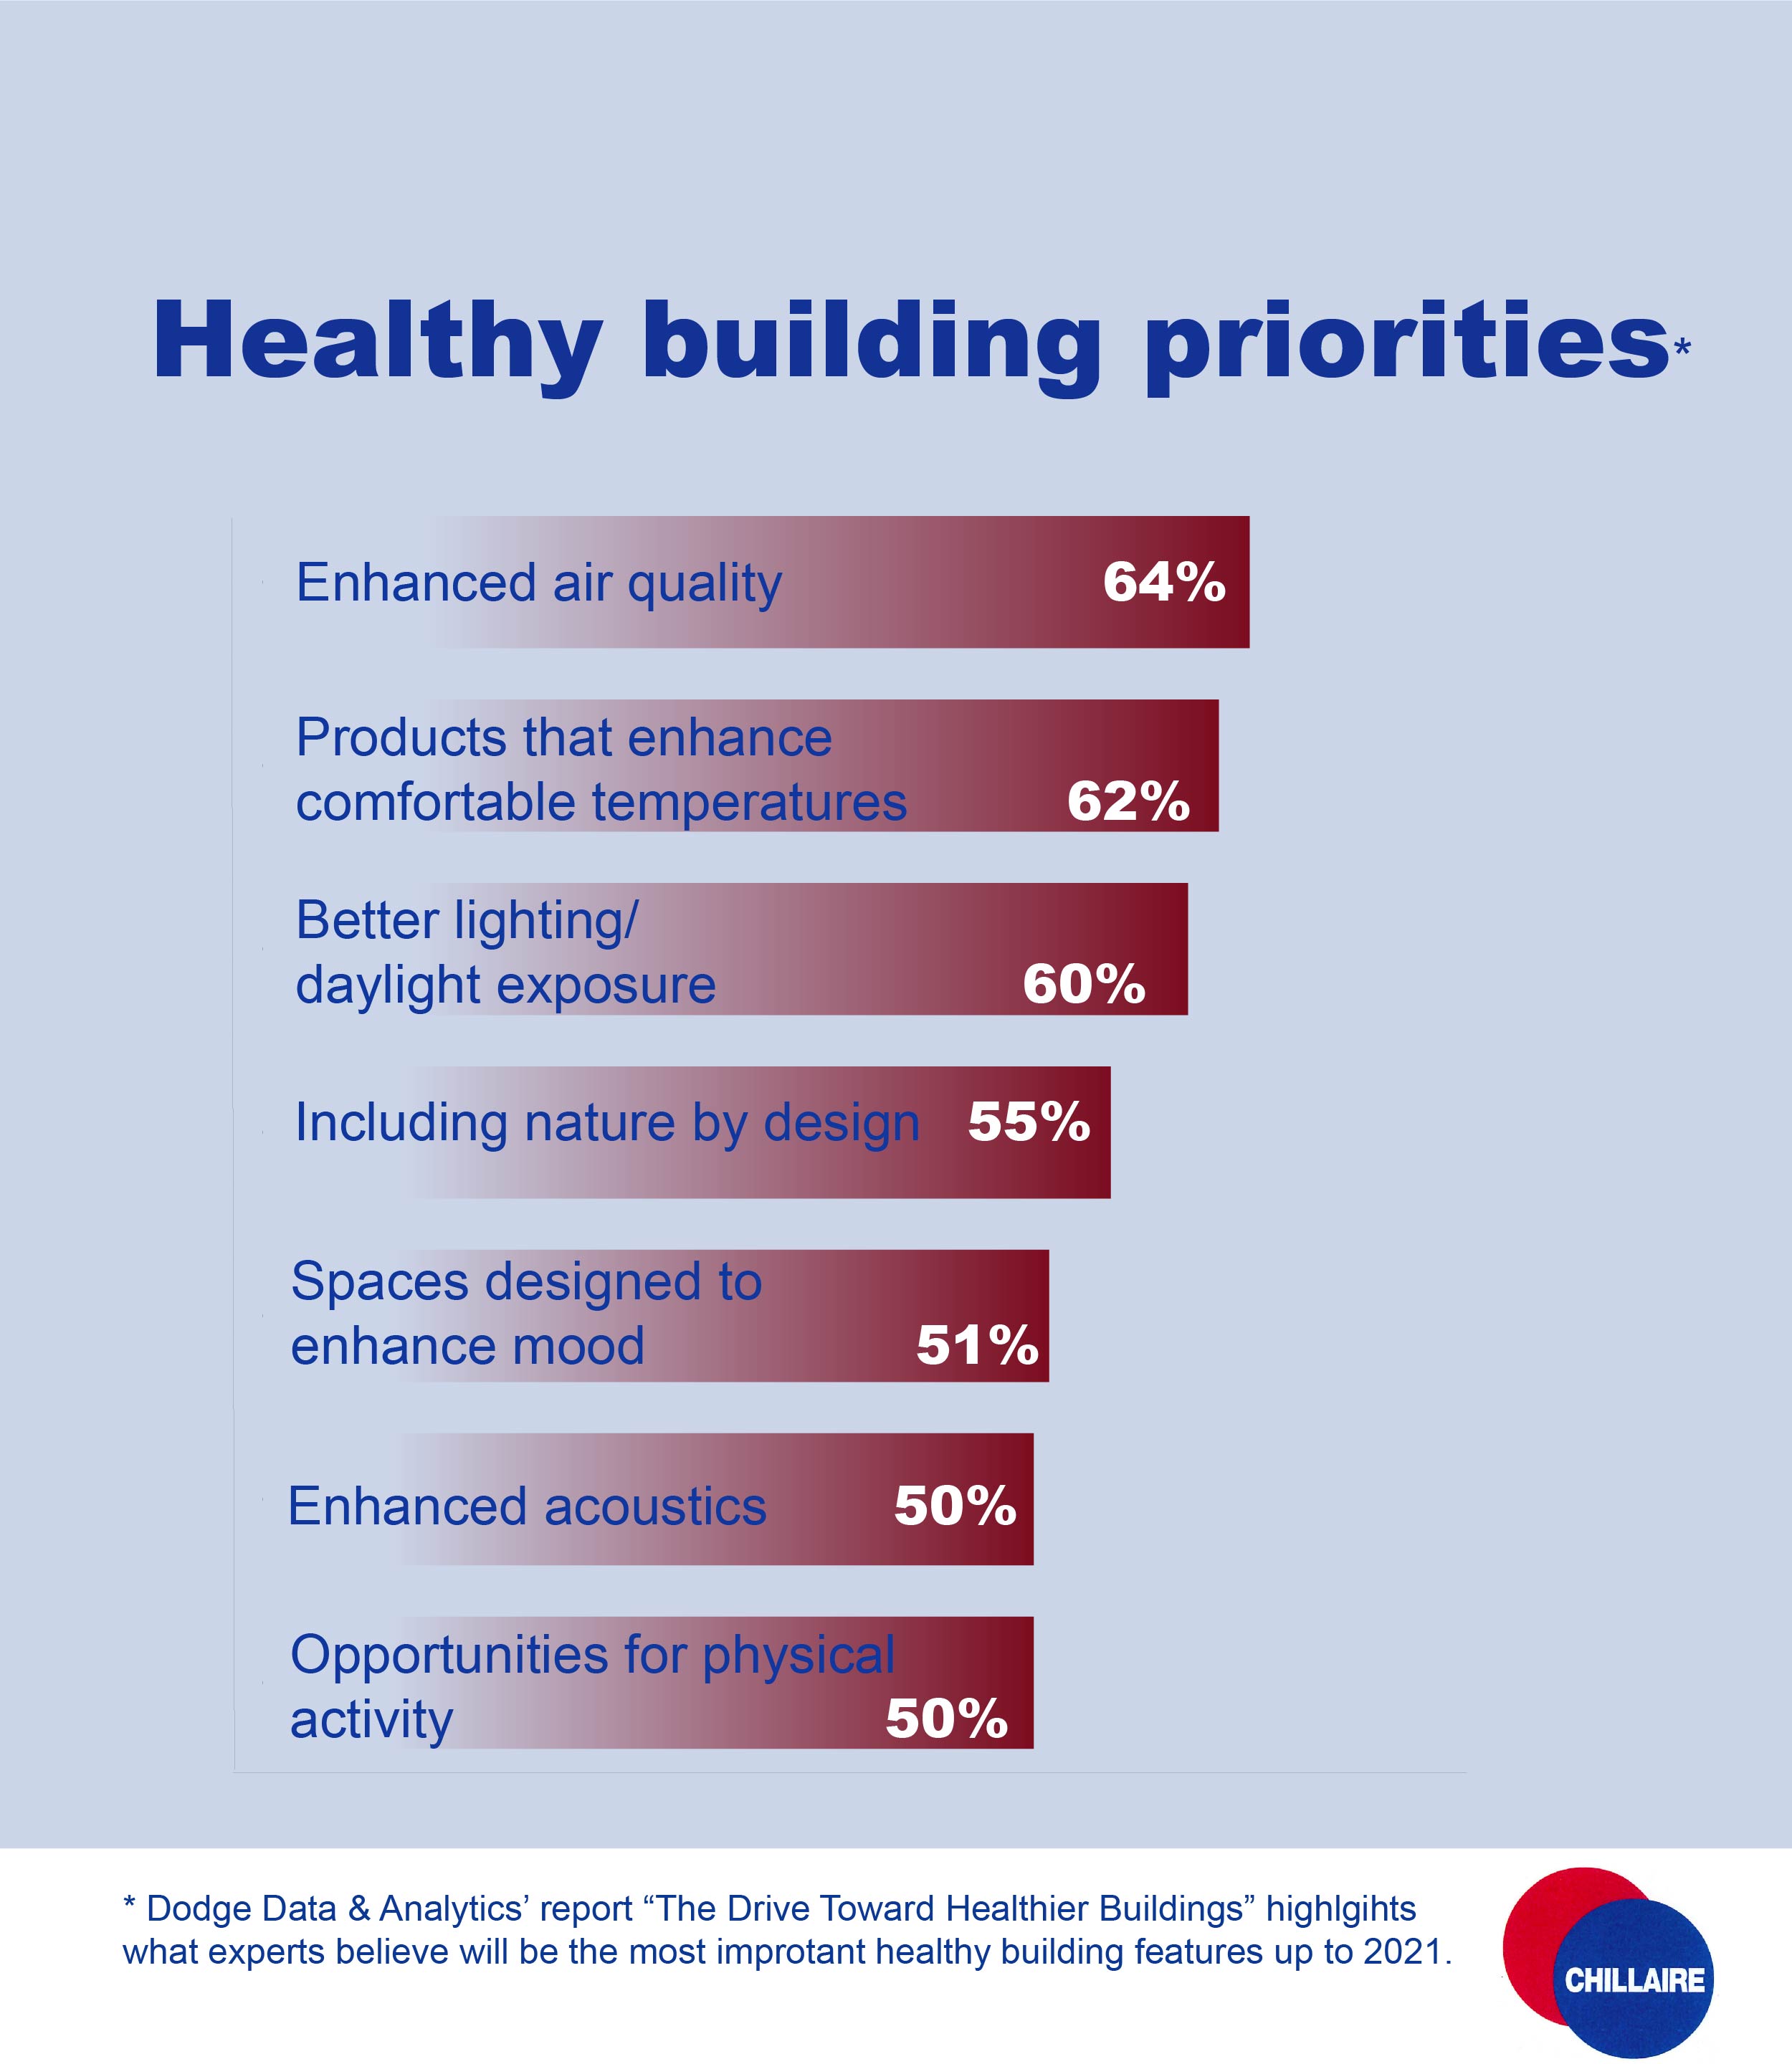 A graphic showing seven health building priorities